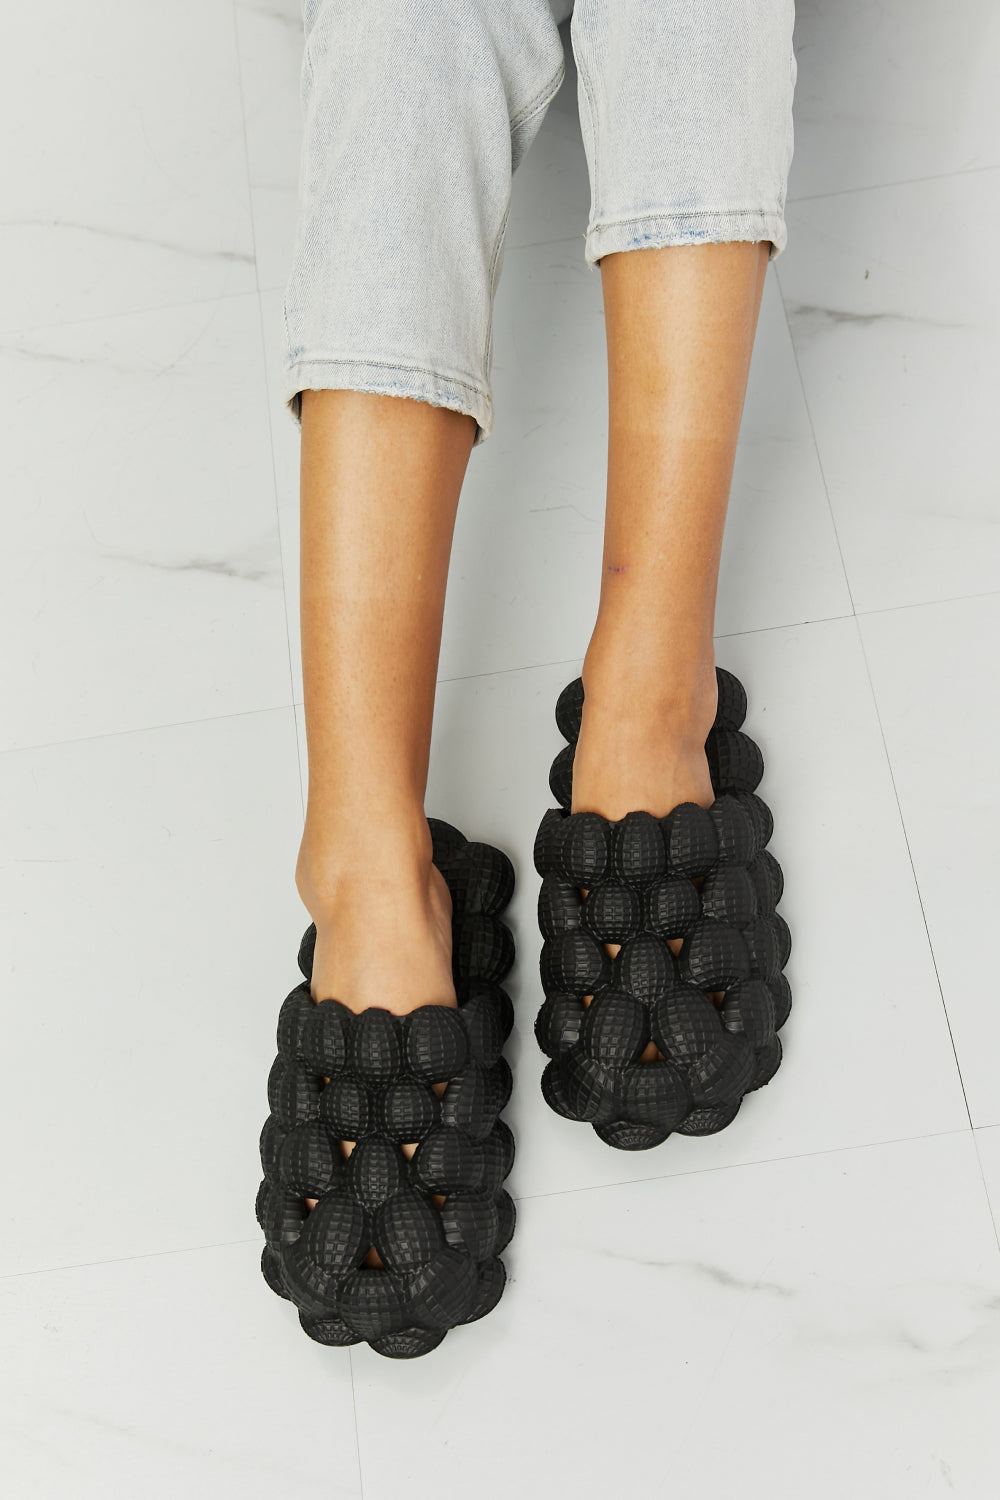 NOOK JOI Laid Back Bubble Puffy Cloud Slide On Flat Comfy Sandals in Black